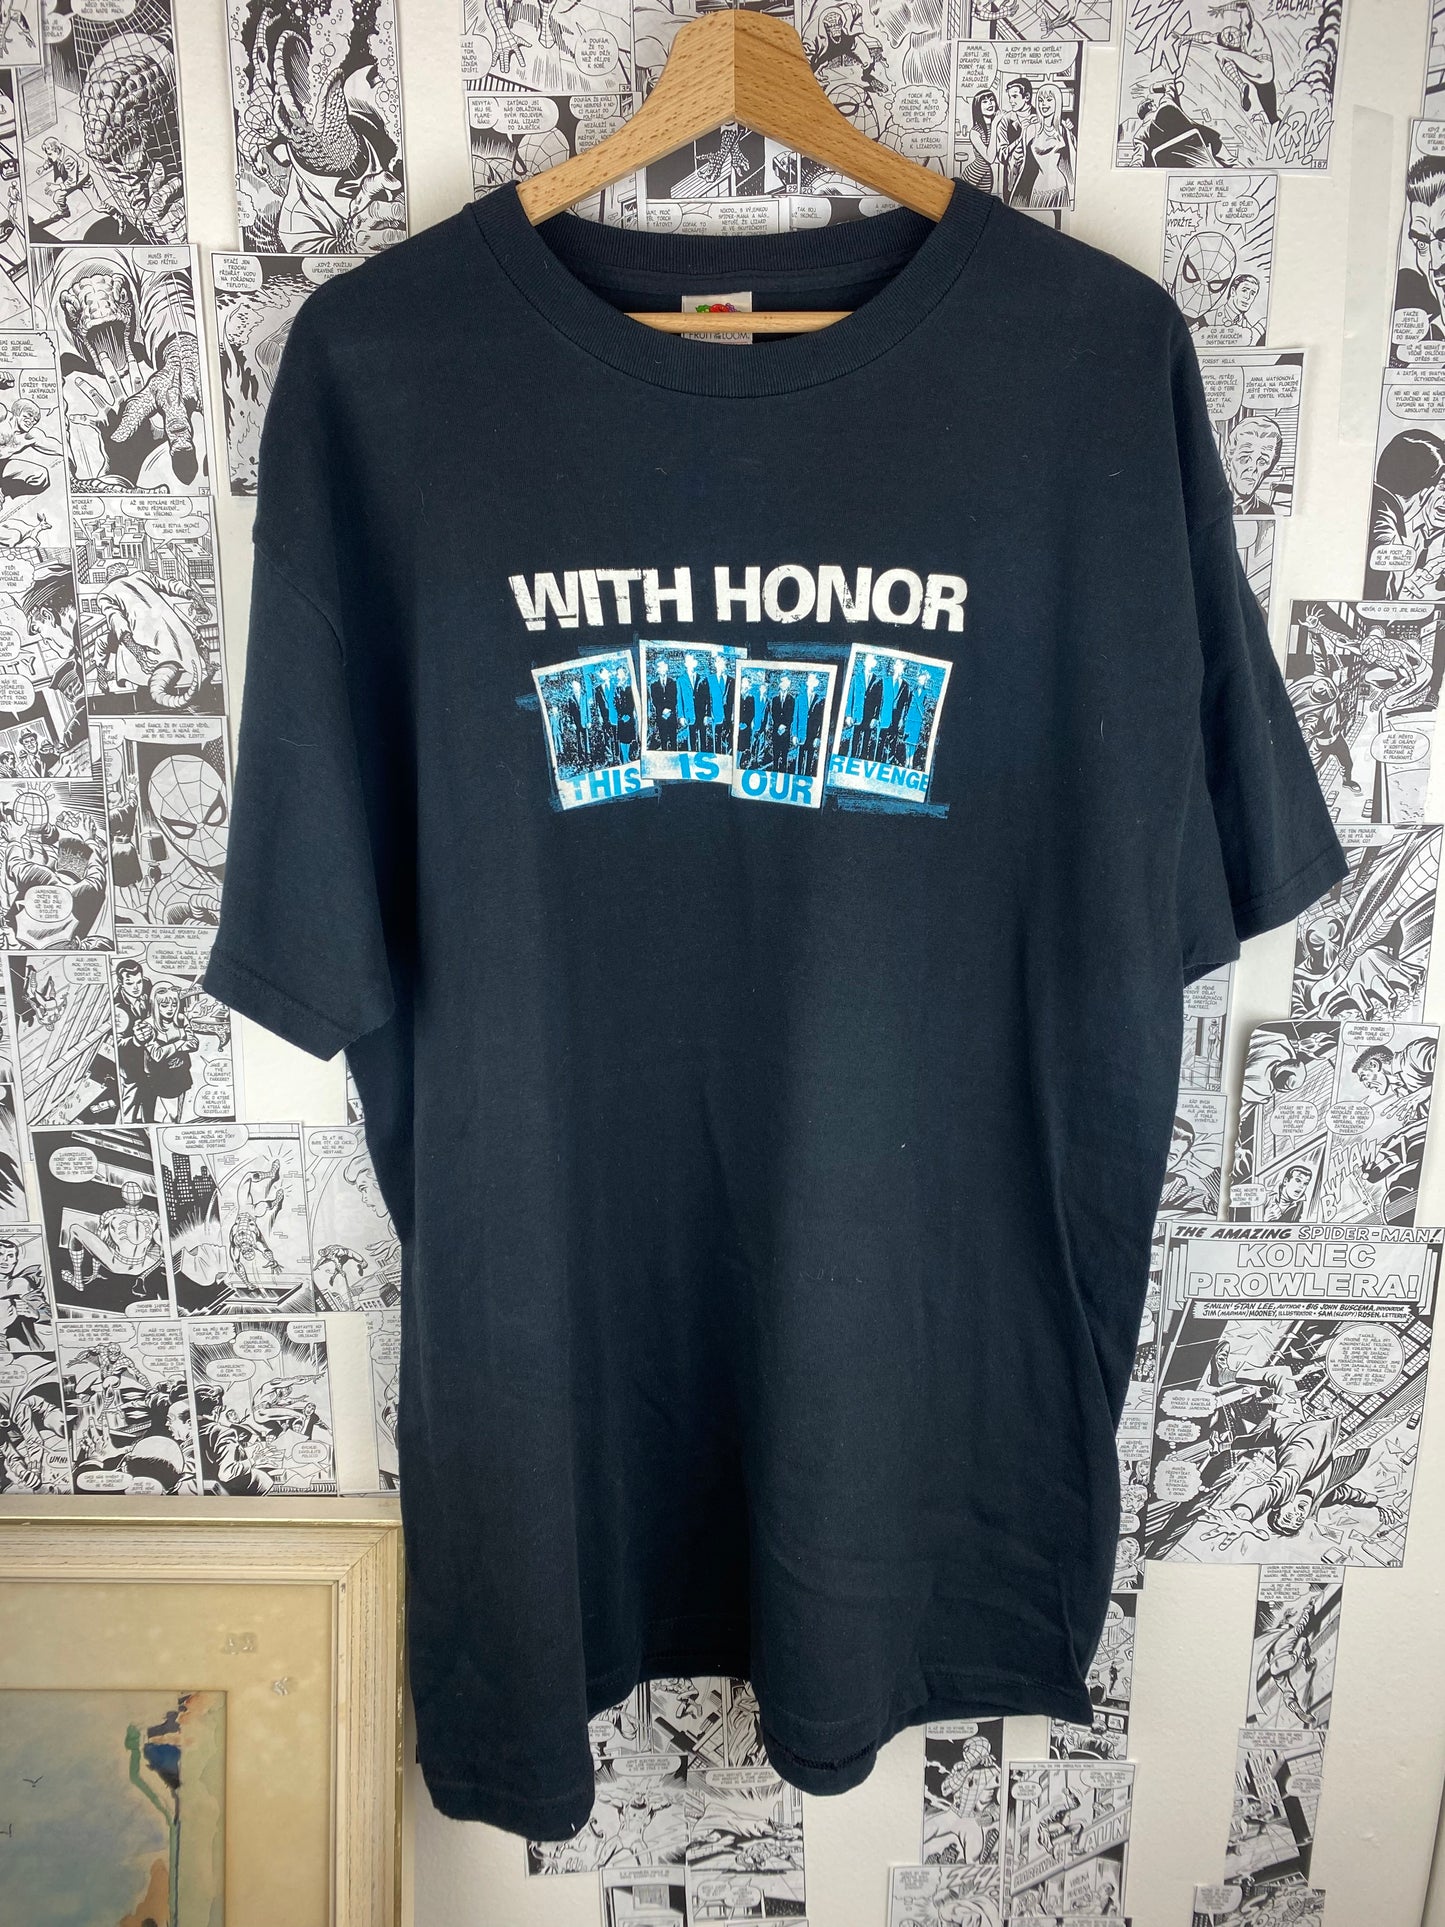 Vintage With Honor “This is our Revenge” 90s t-shirt